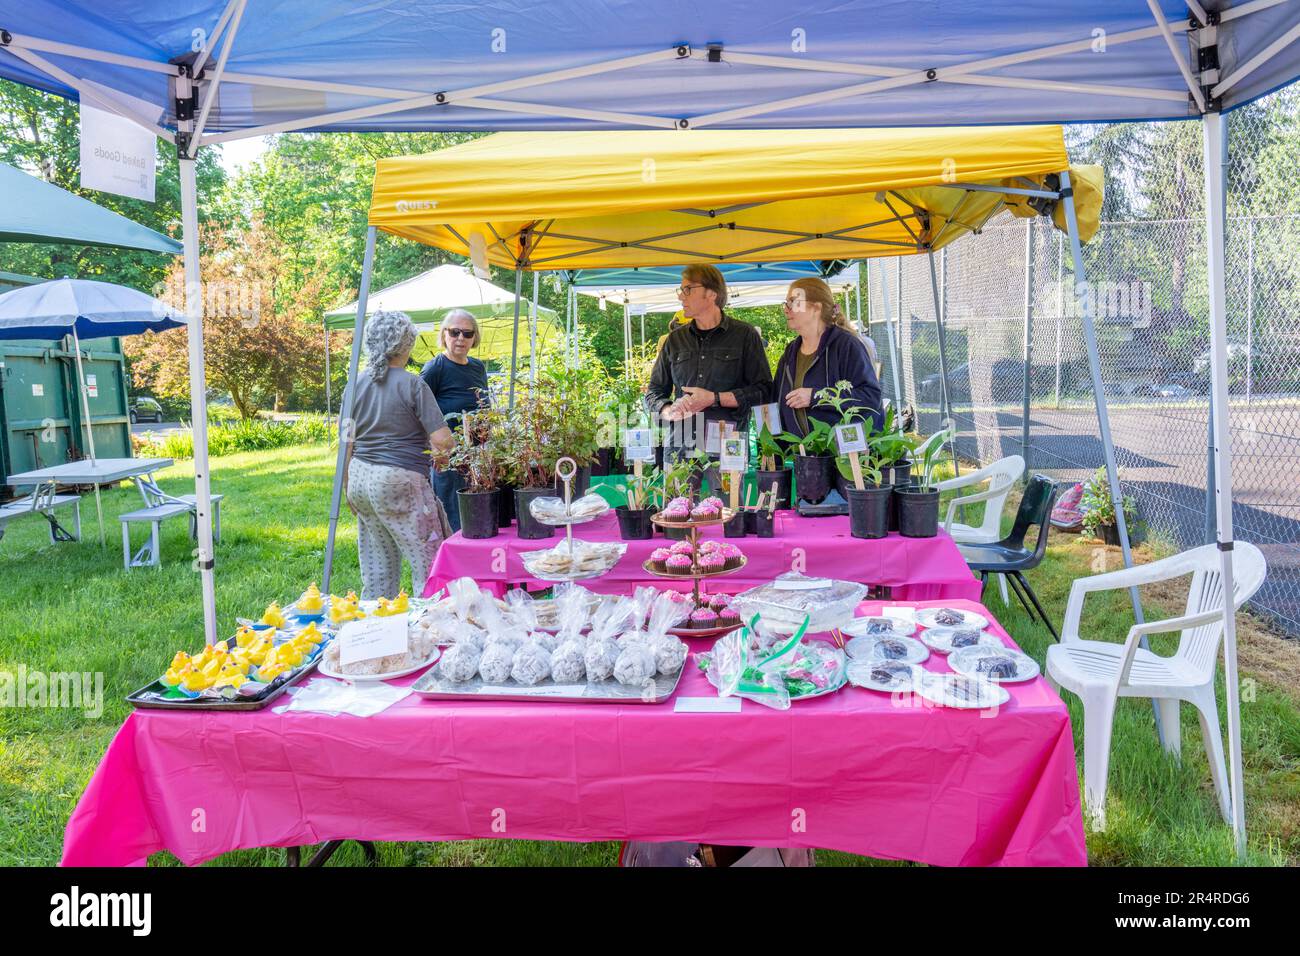 Issaquah, Washington, USA.  Array of baked goods for sale at an outside Pea Patch plant / bake sale fundraiser. Stock Photo